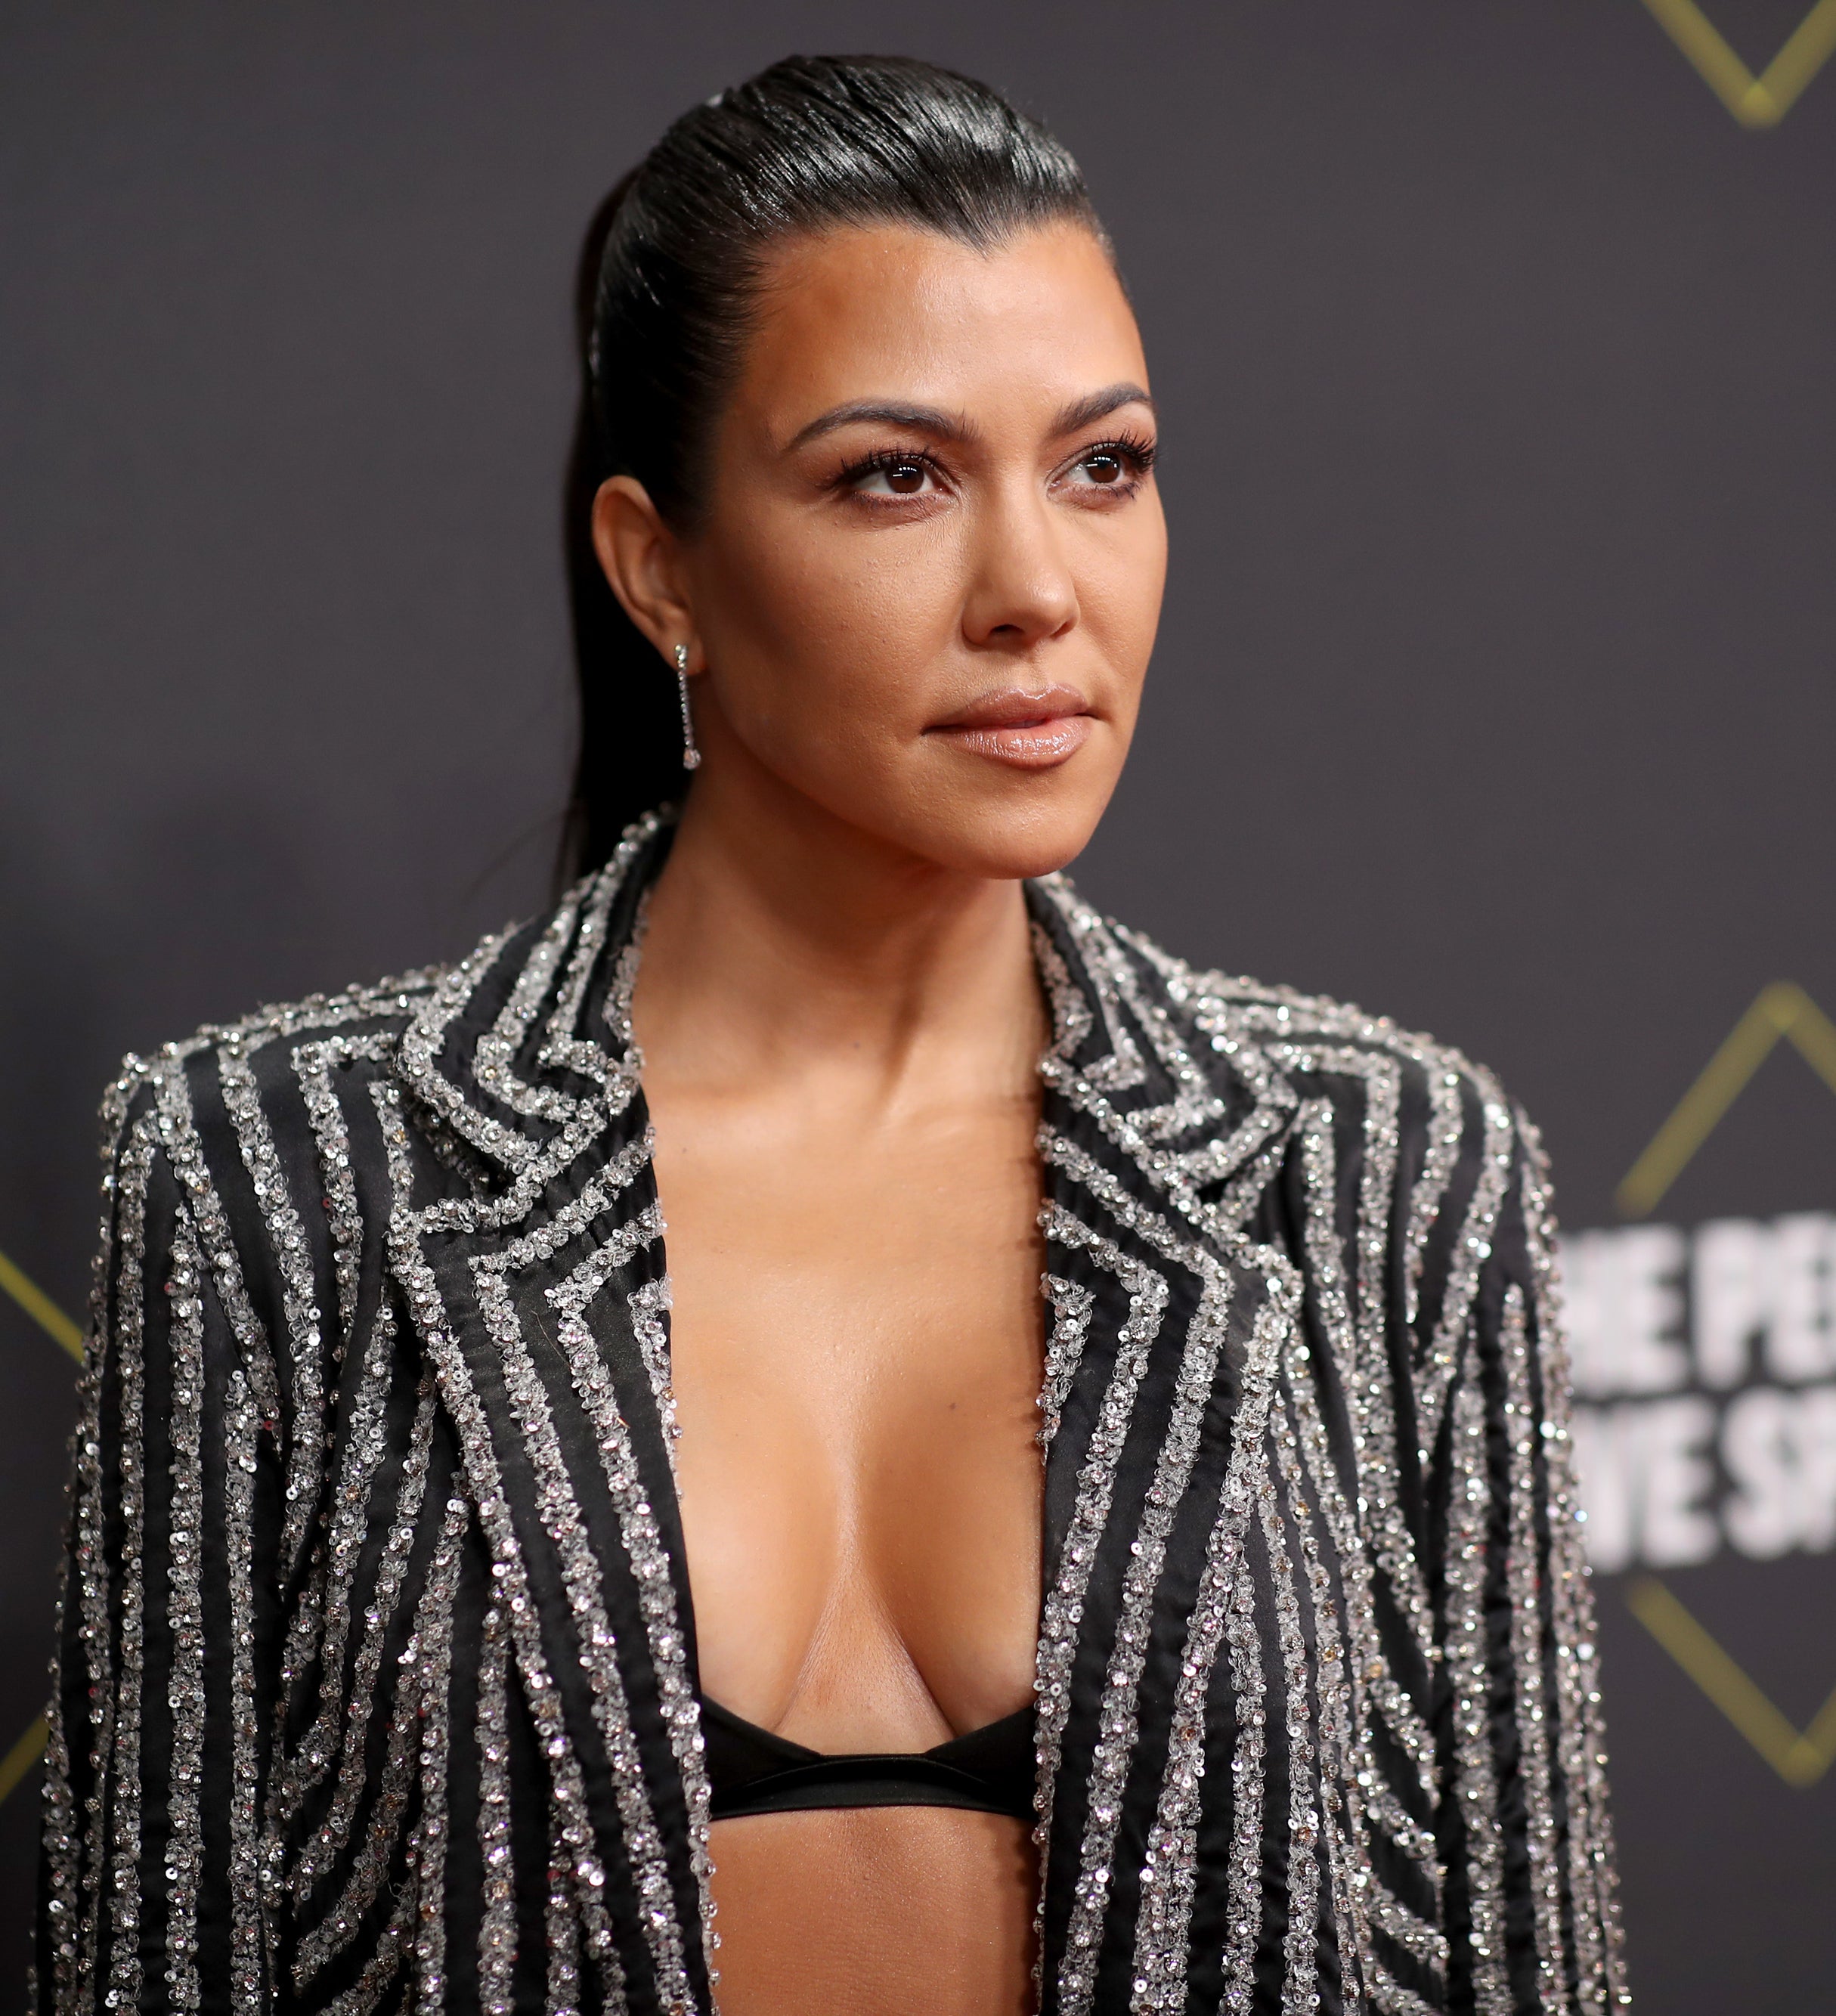 Close-up of Kourtney at a media event